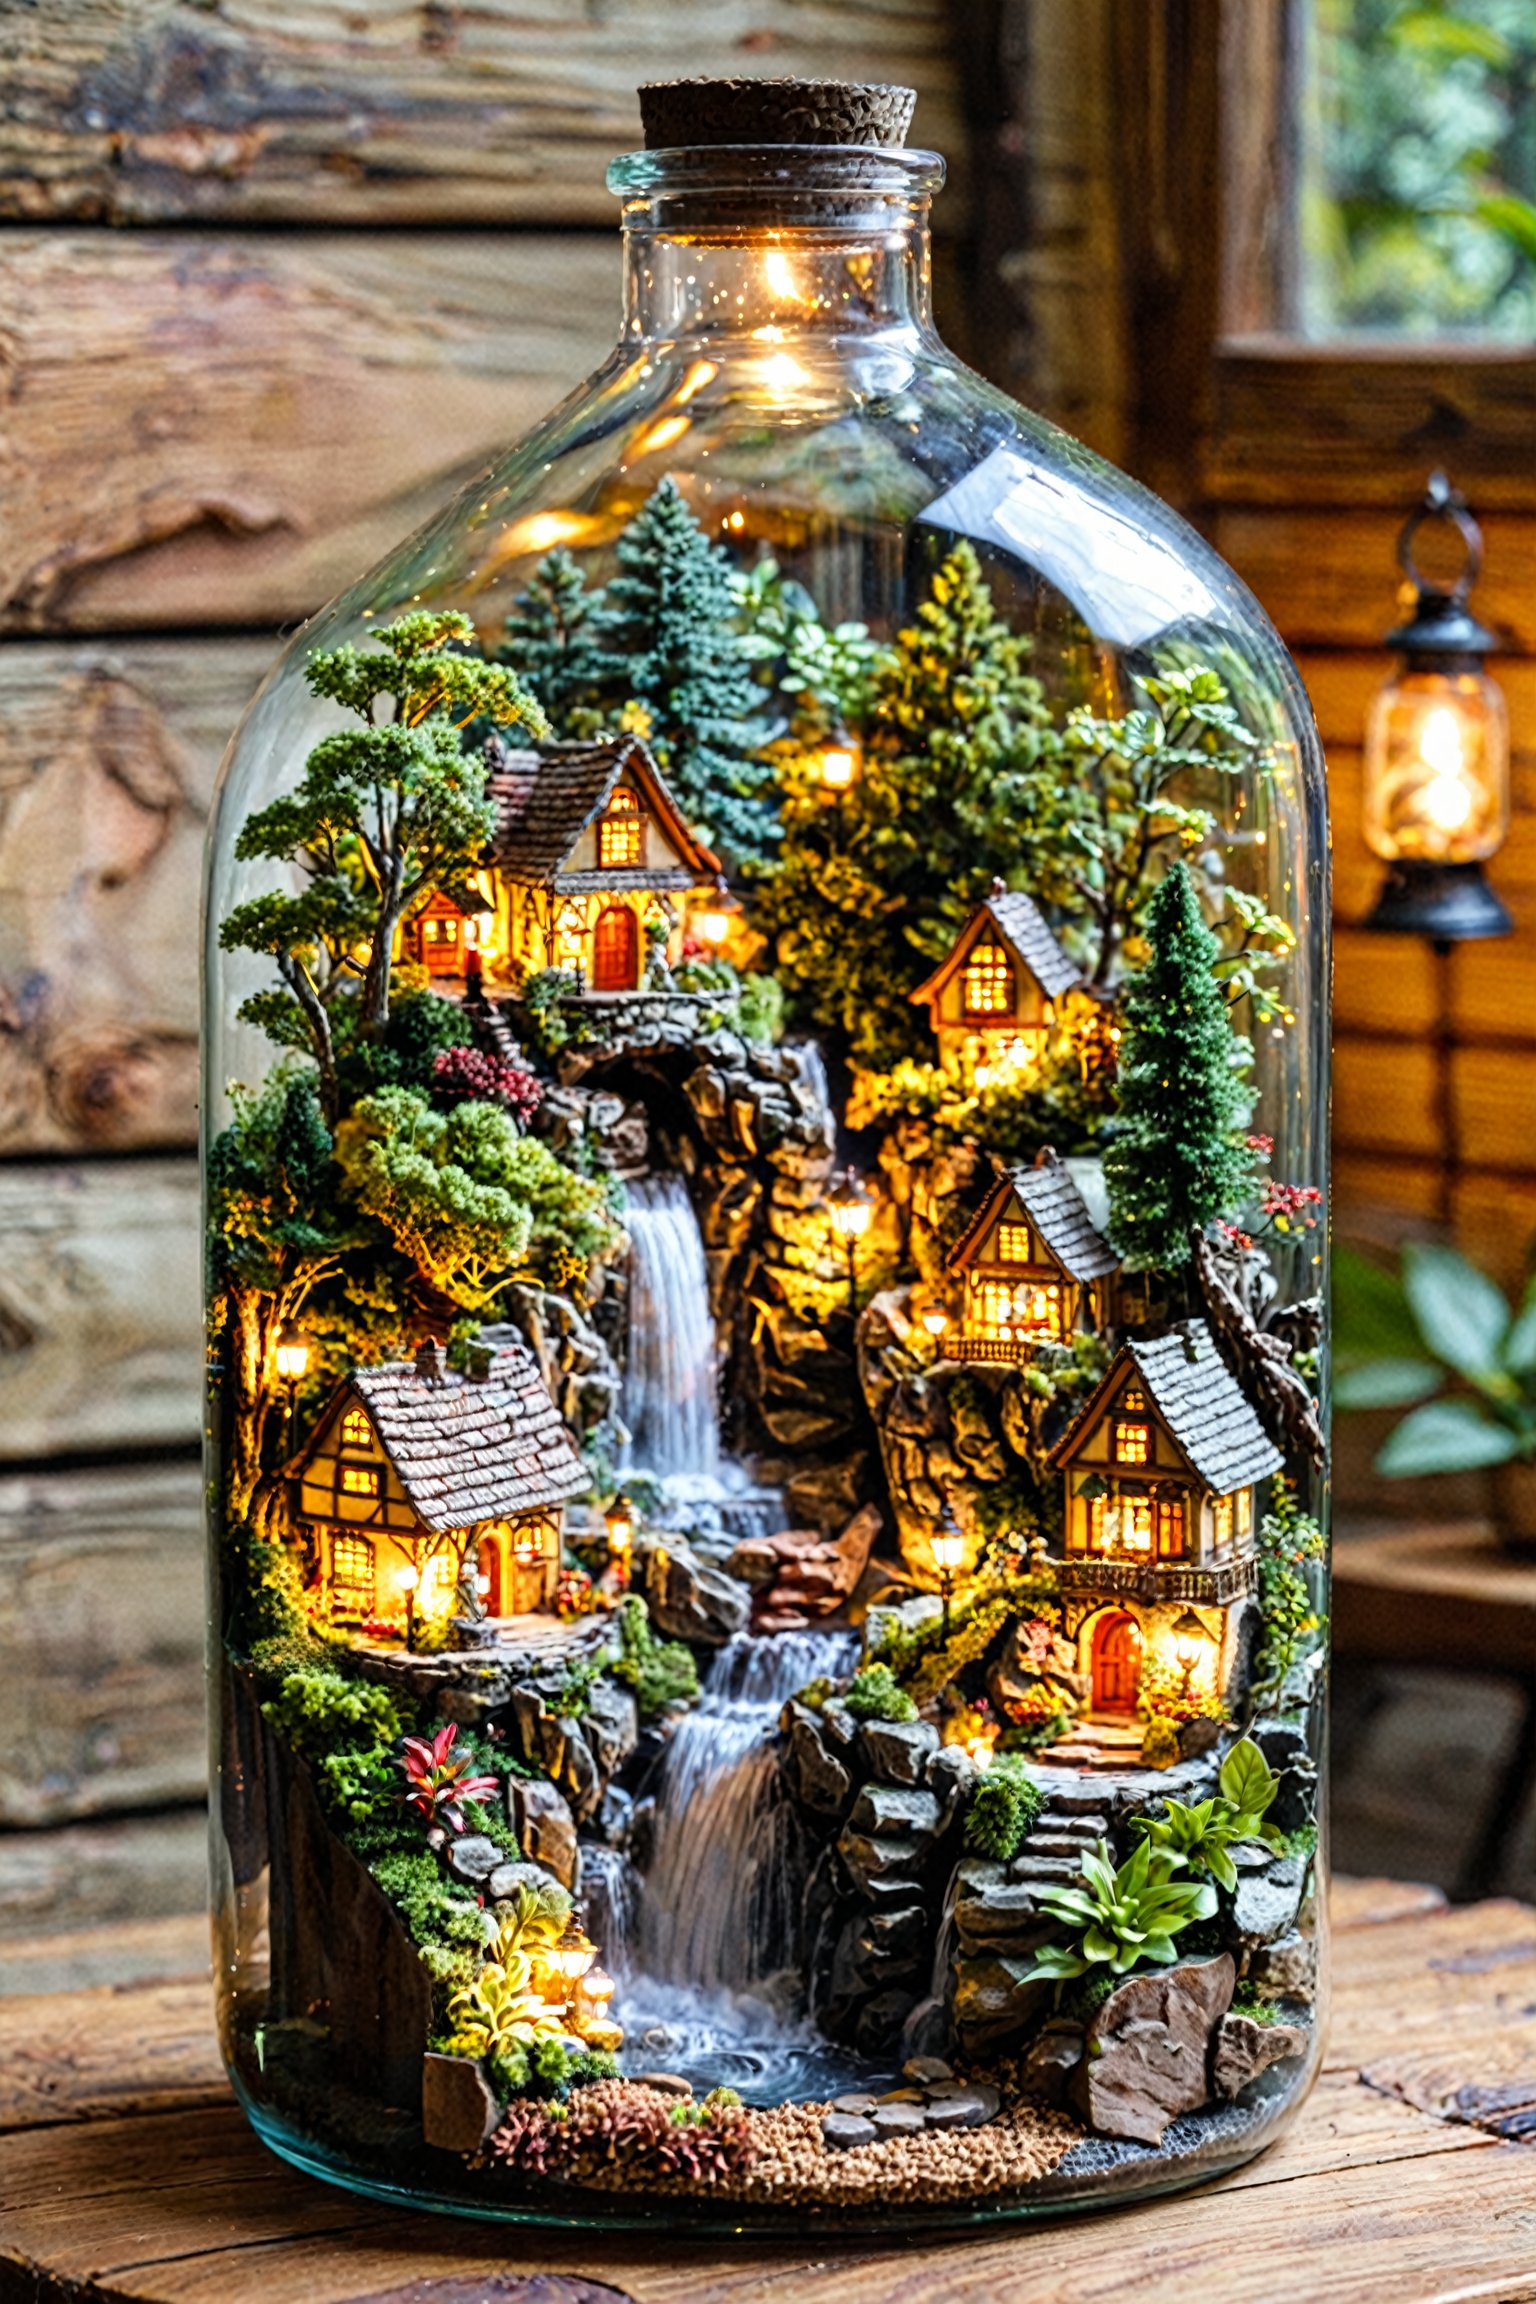 A meticulously crafted miniature scene inside a glass bottle. The bottle is placed on a wooden surface. The miniature world within the bottle consists of intricately designed houses, trees, and a waterfall. The houses have detailed roofs, windows, and doors. There are also lanterns illuminating certain parts of the scene, giving it a warm, cozy ambiance. The waterfall cascades down rocky terrain, and there are various other elements like bridges, pathways, and decorative plants.